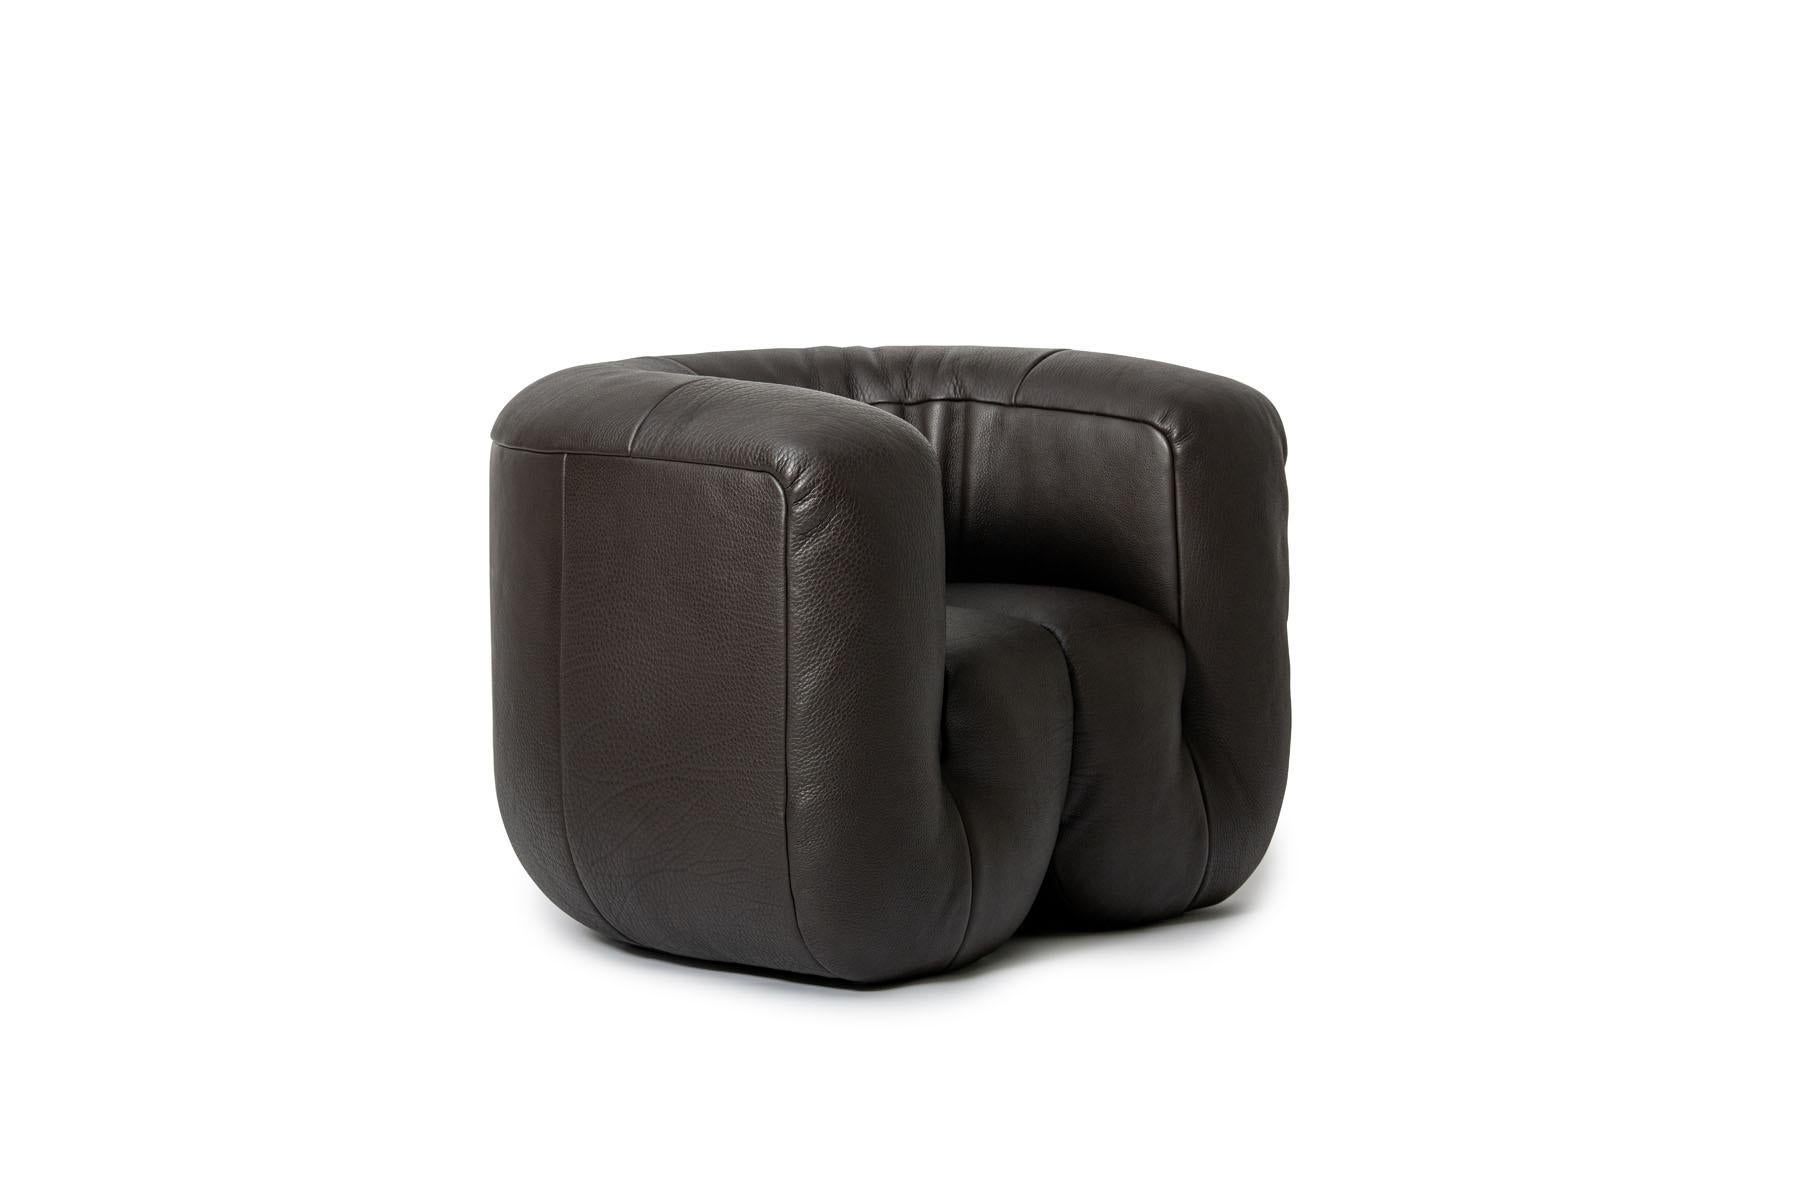 Swiss De Sede DS-707 Armchair in Black Club Leather Upholstery by Philippe Malouin For Sale